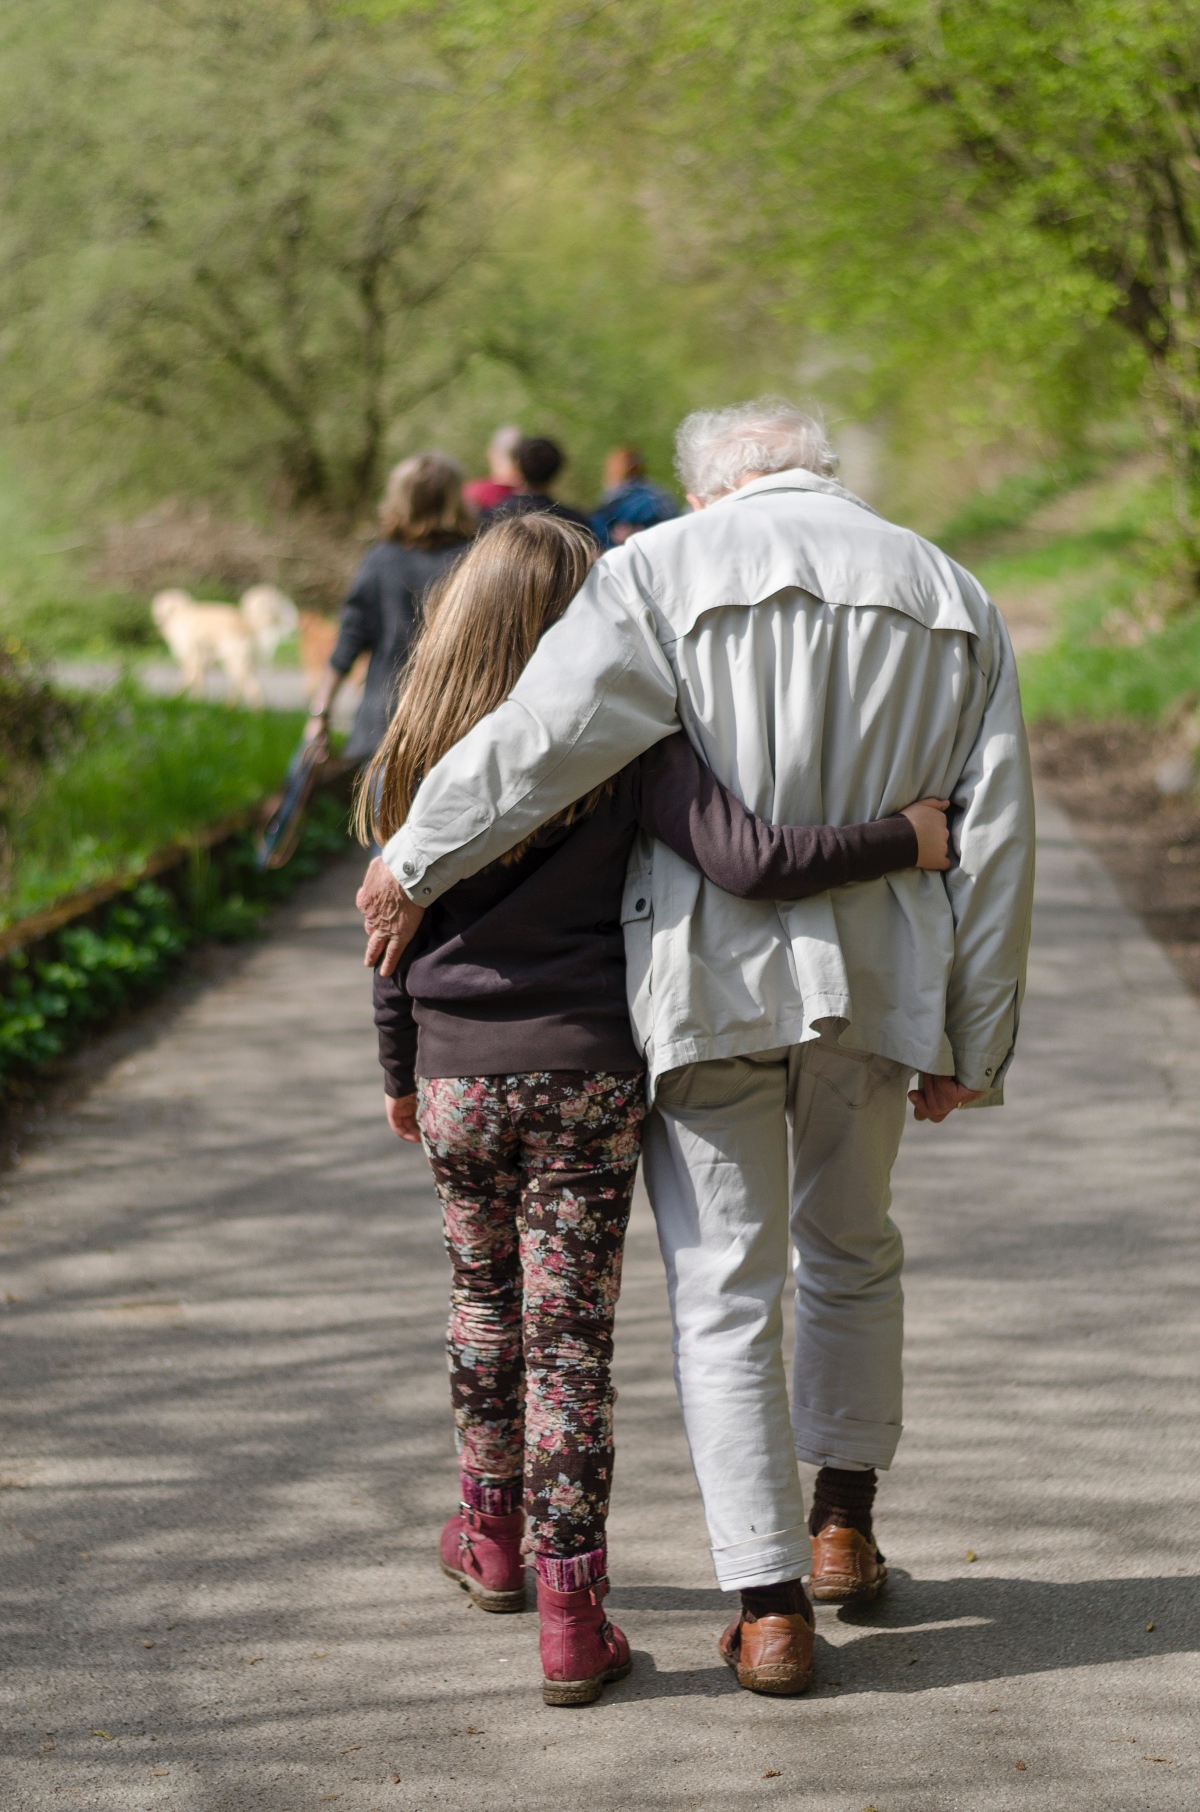 elderly man walking with a young girl